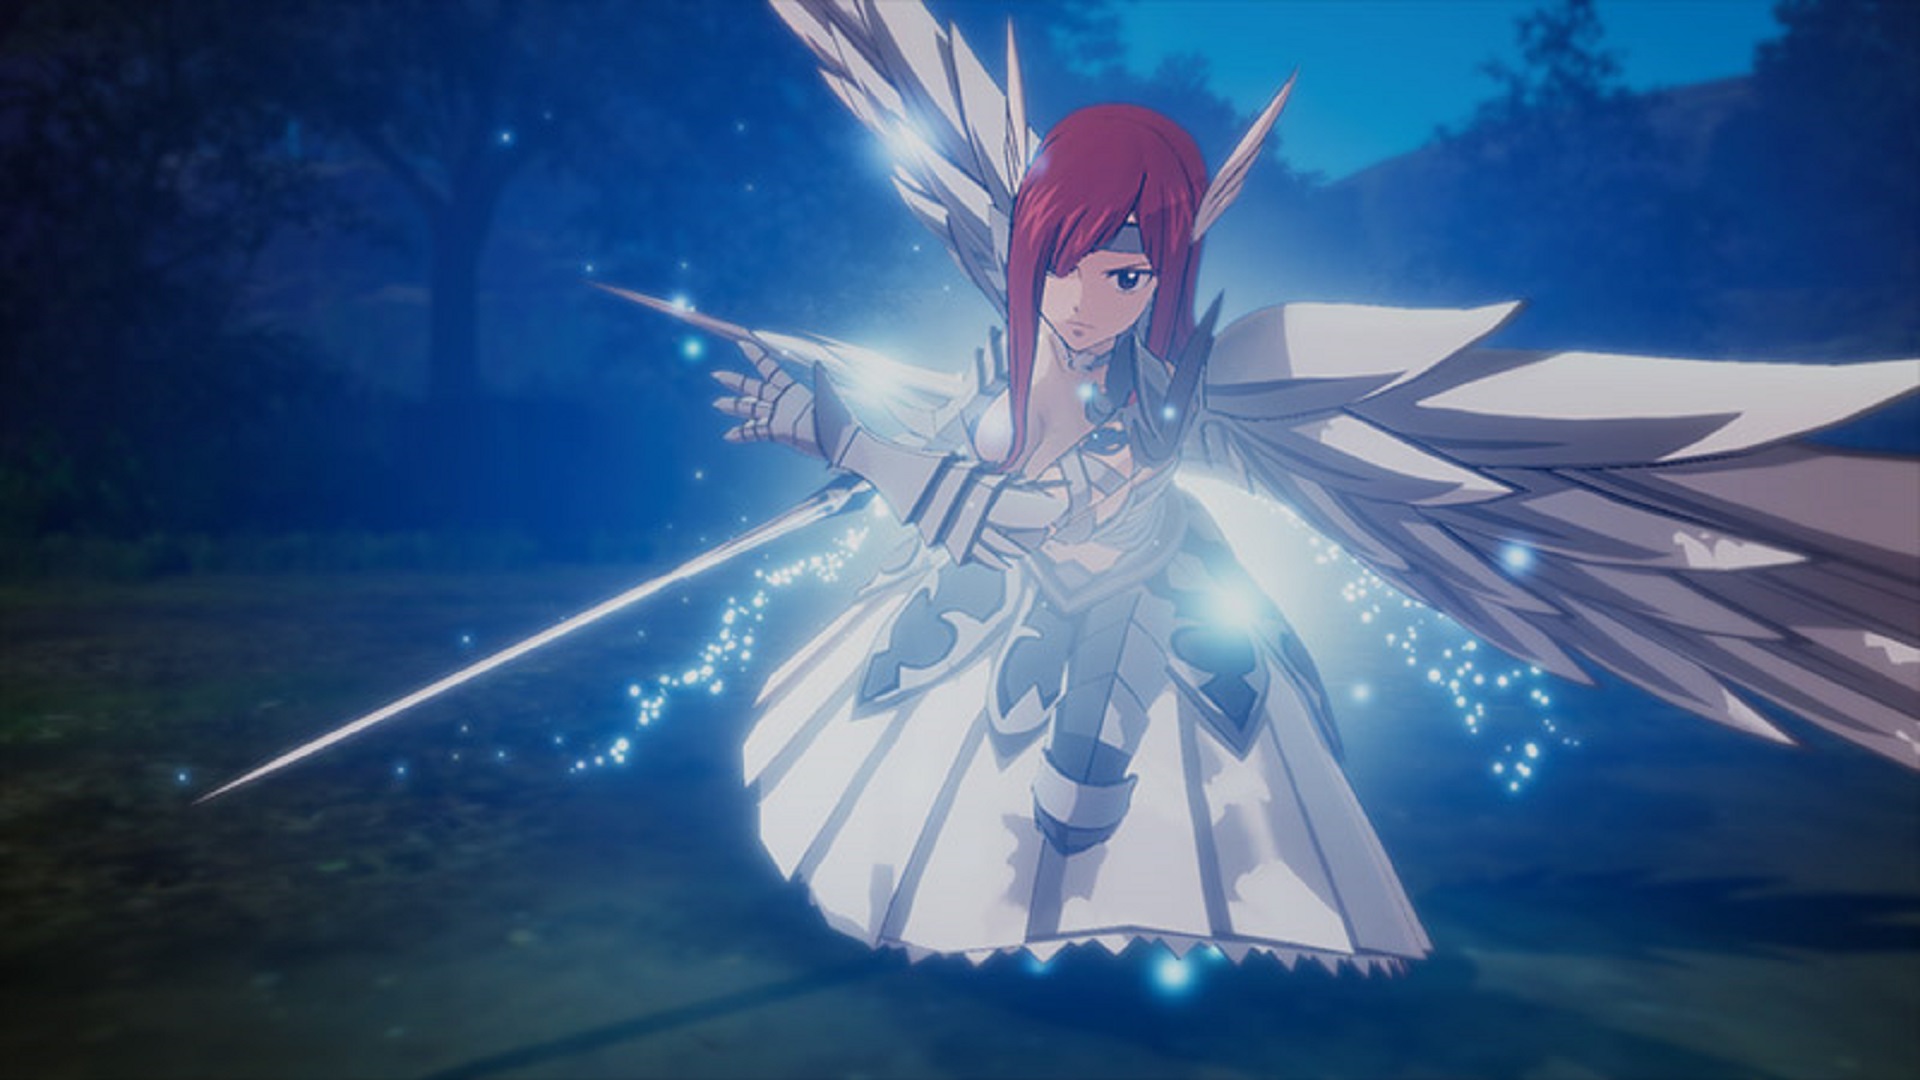 FAIRY TAIL’s New North American Release Date Announced by Koei Tecmo